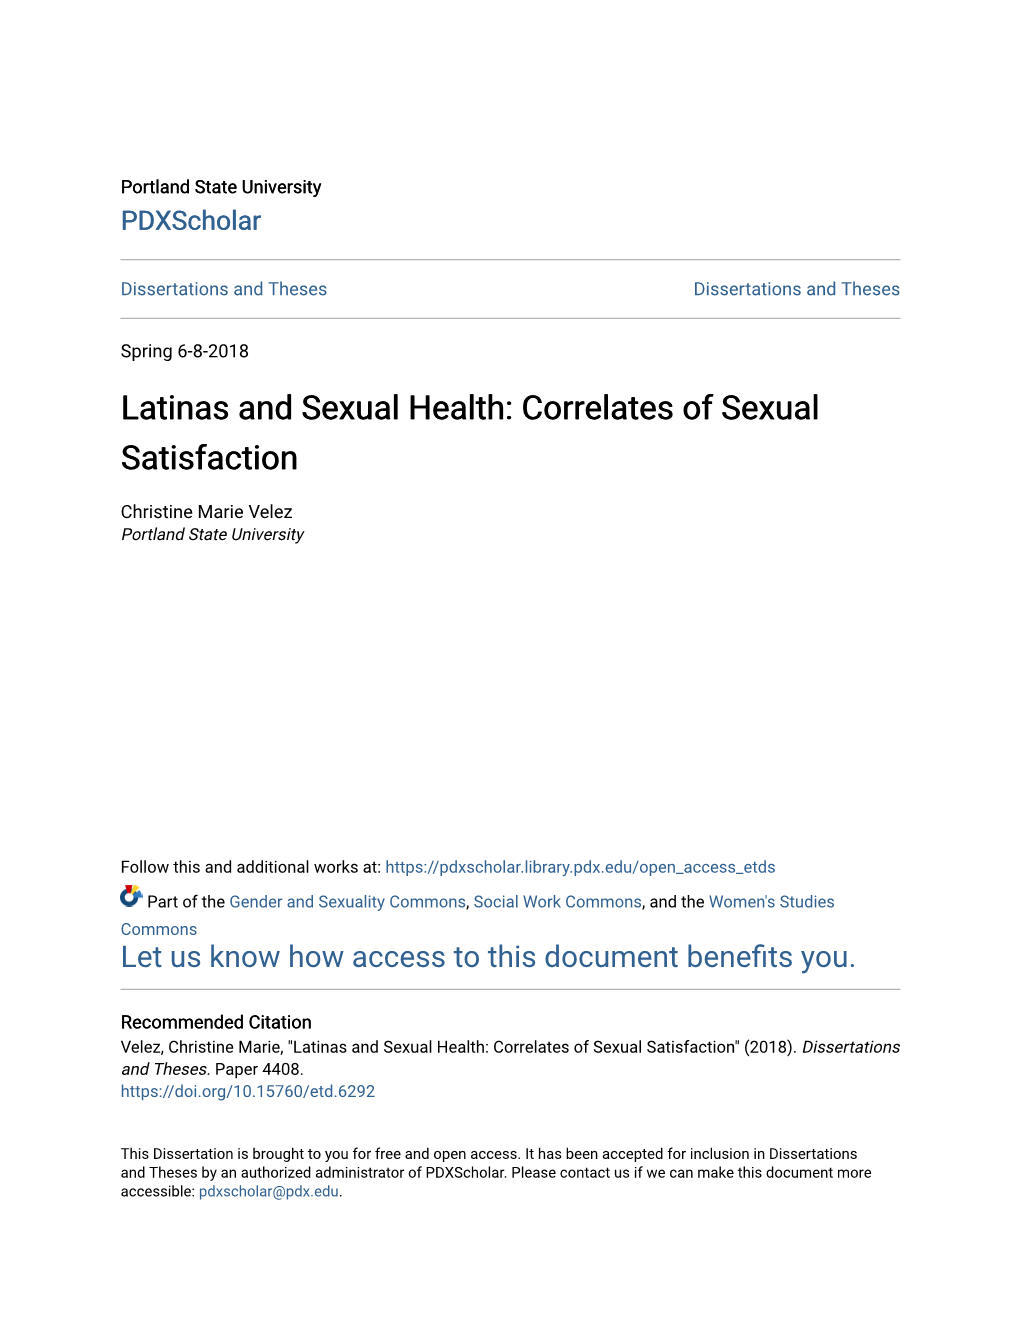 Latinas and Sexual Health: Correlates of Sexual Satisfaction